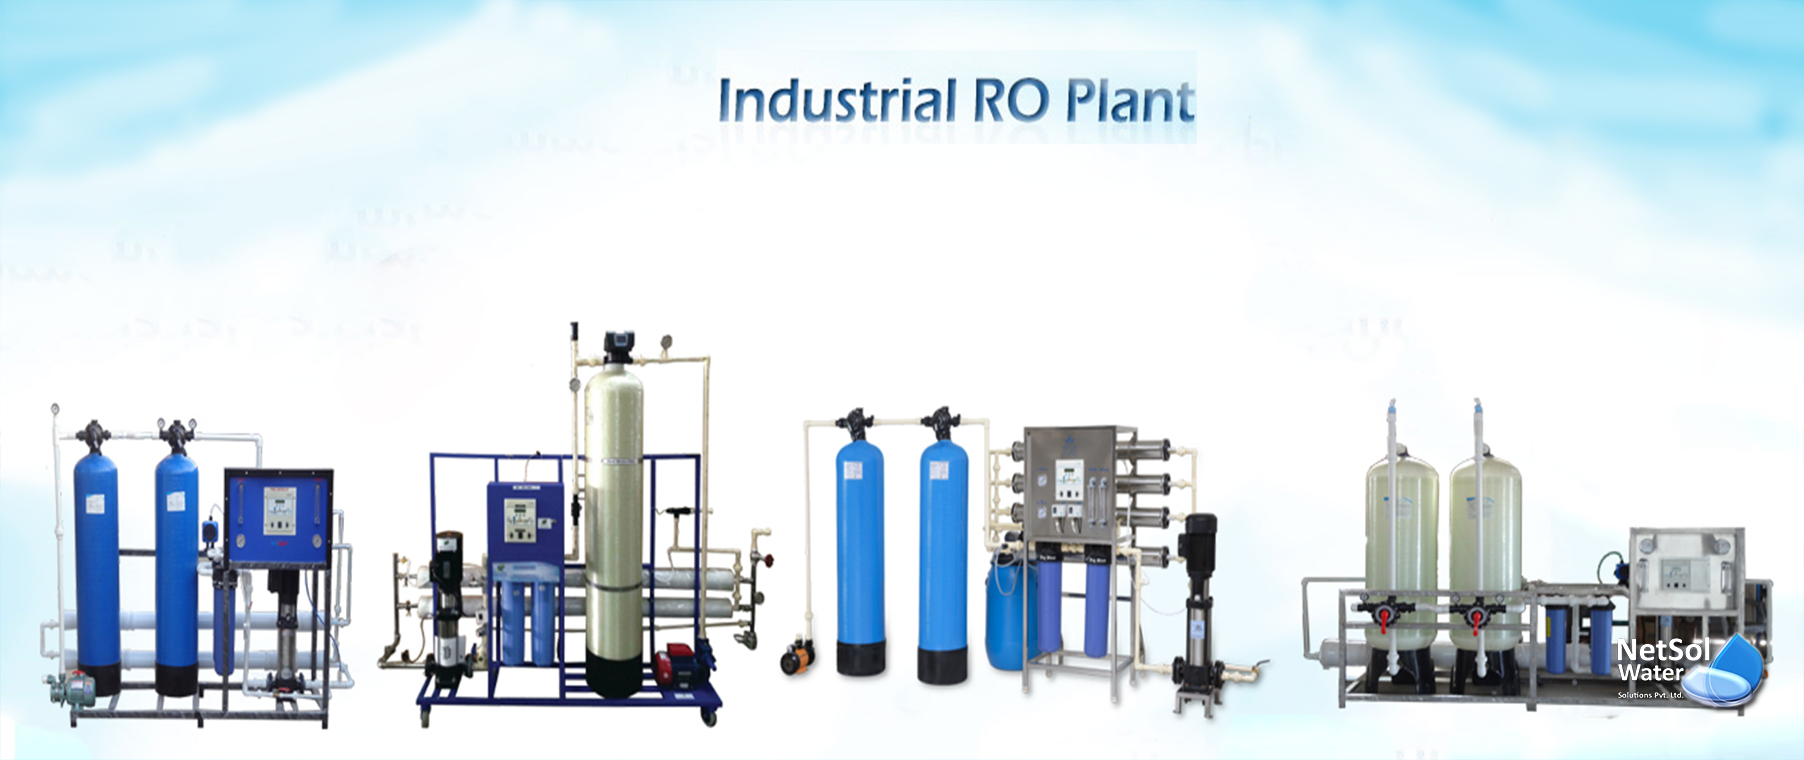 Industrial RO Plant Manufacturer in Delhi-NCR, India 9650608473